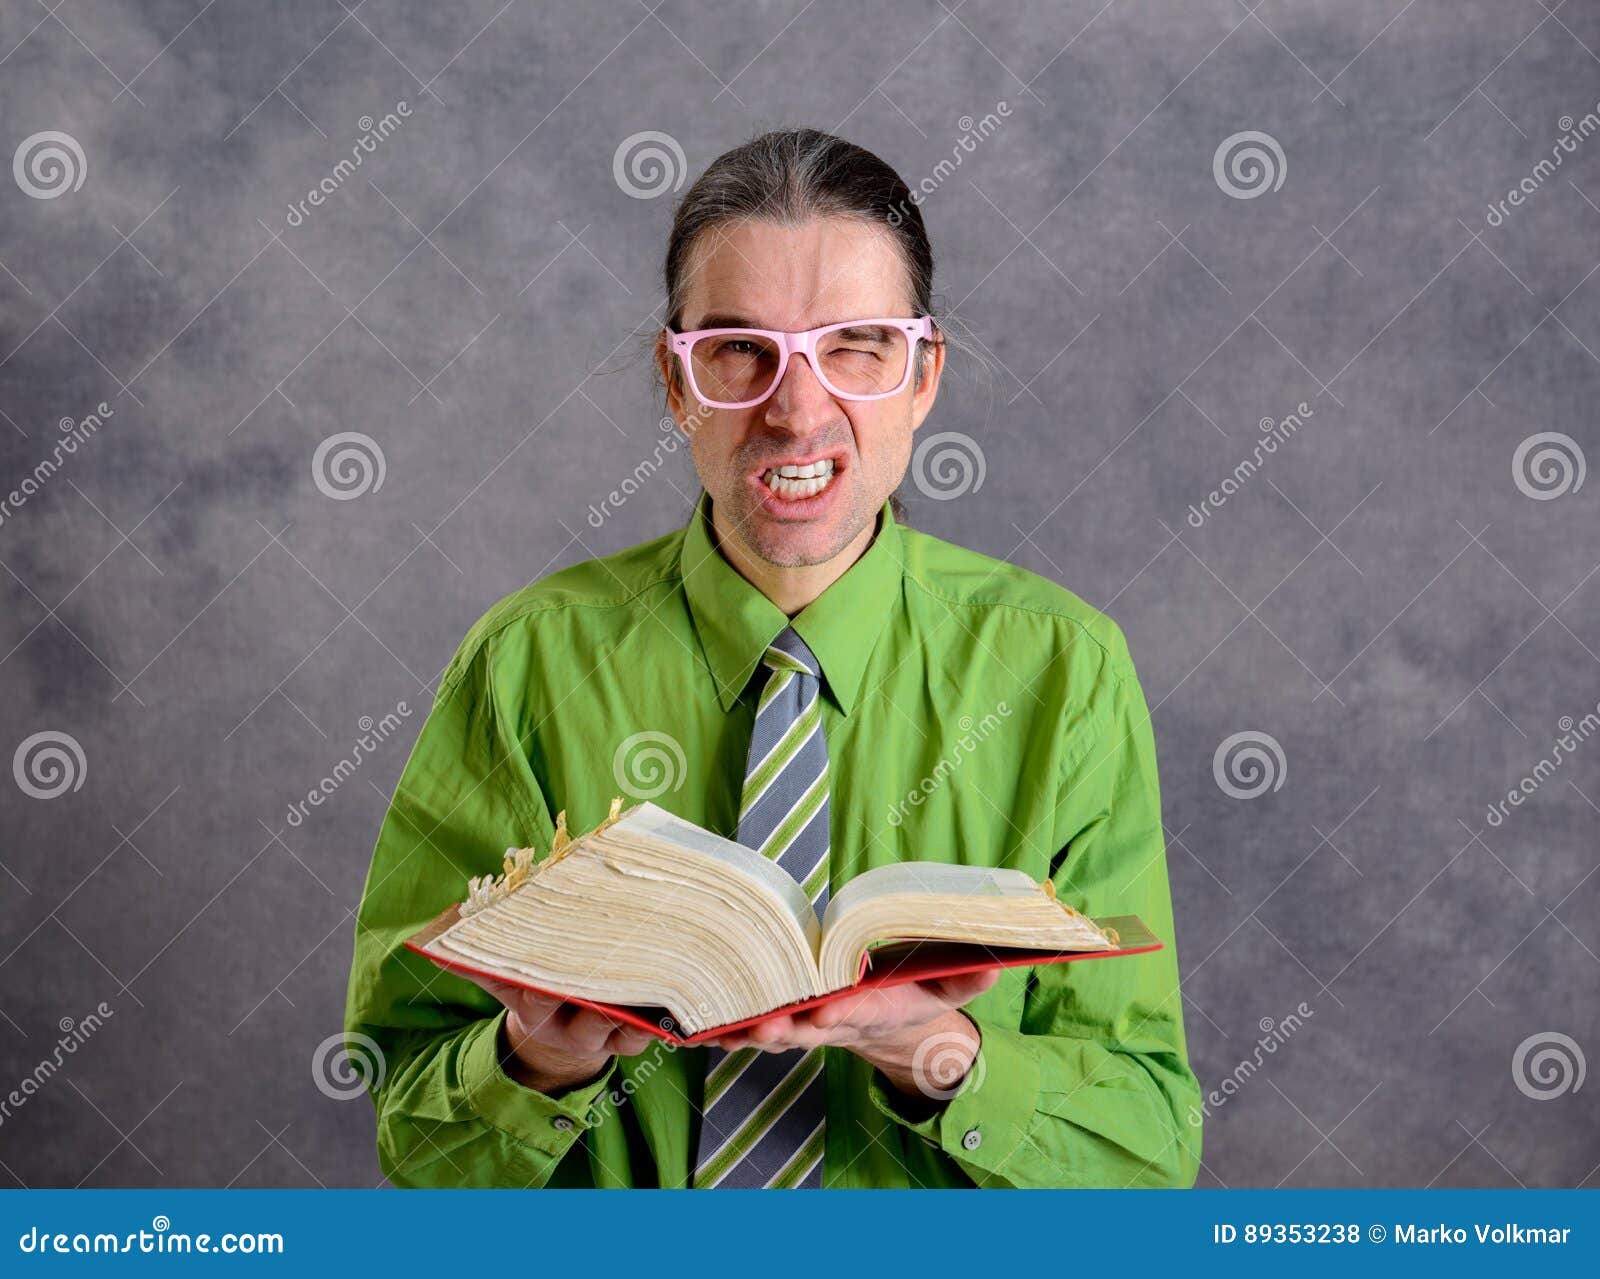 angry lawyer with statute book and pink glasses